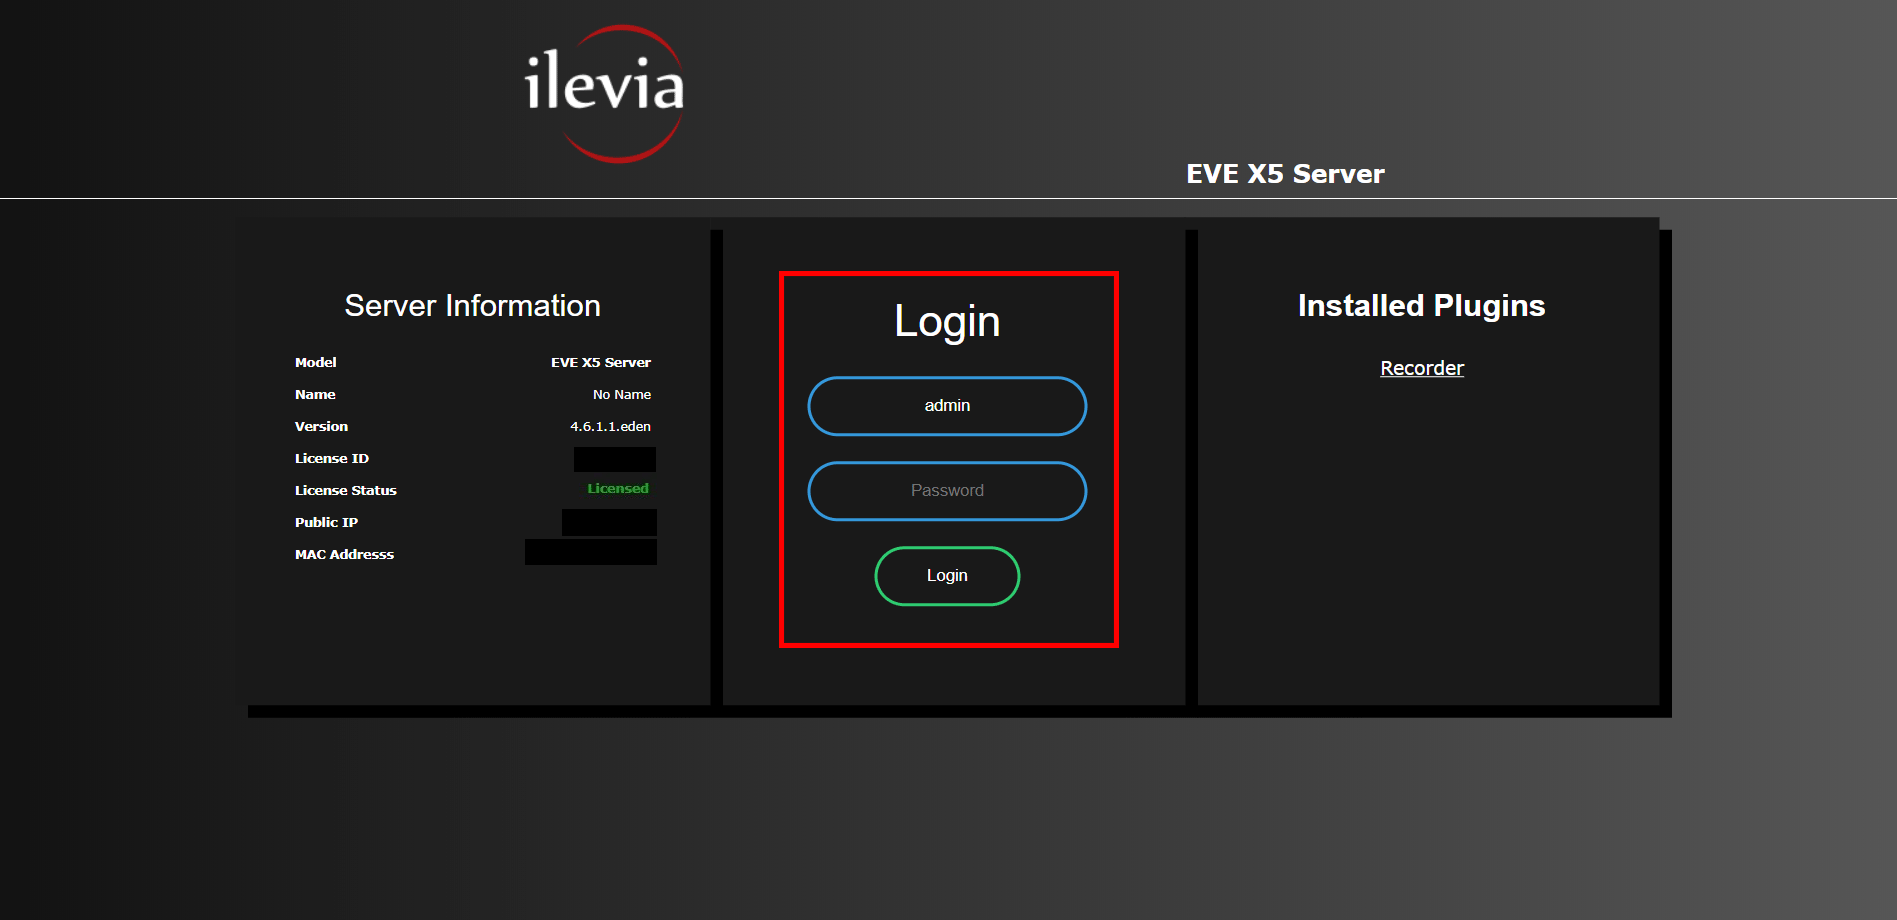 How to login insde the configuration settings throught the EVe Server web interface